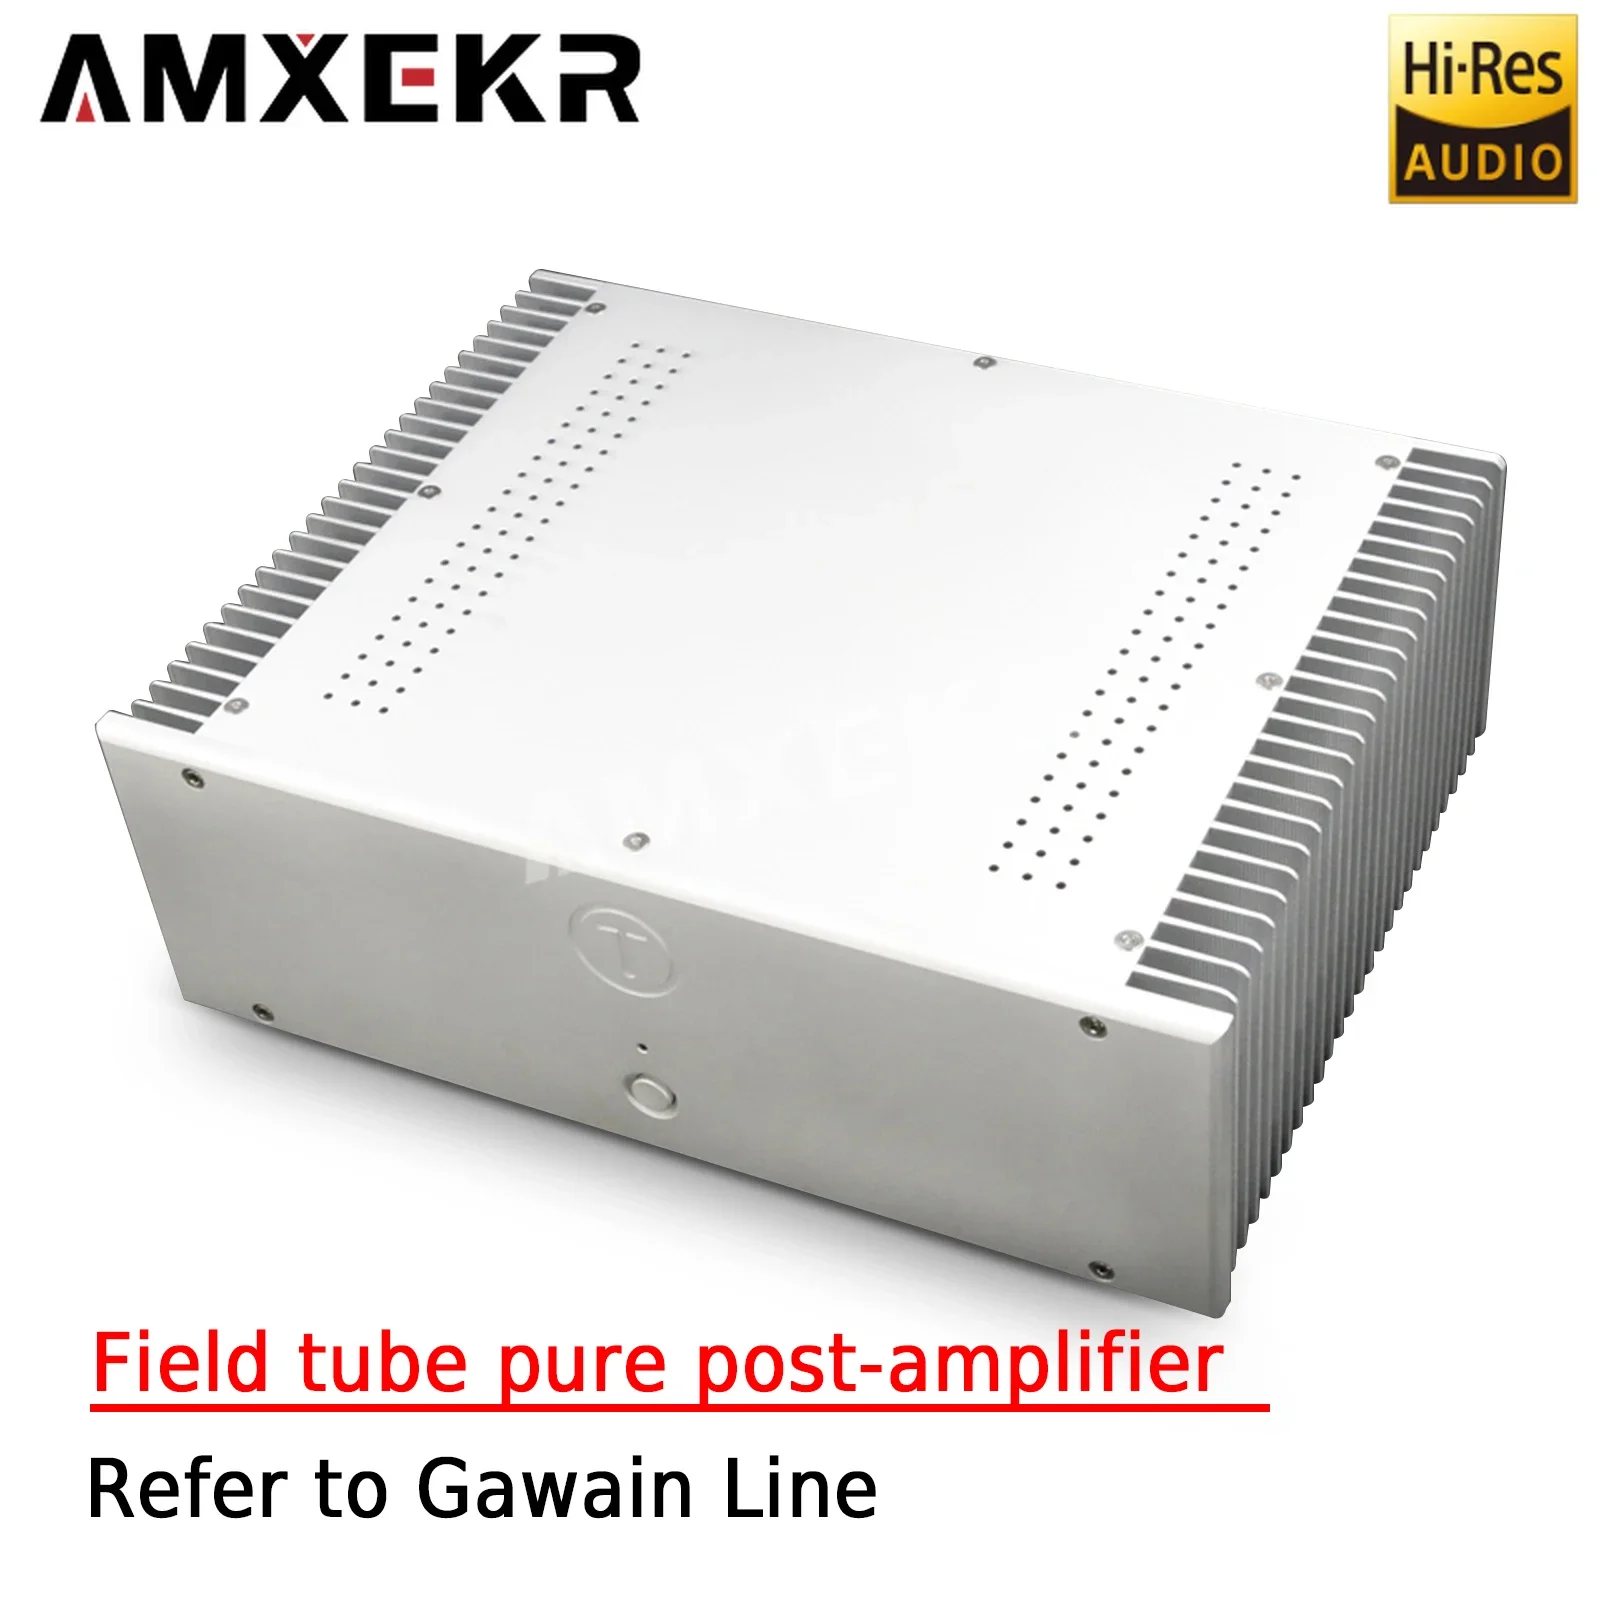 

AMXEKR G3 Field Tube Pure Post-level Power Amplifier Reference High Price Machine Gawain Line Home Theater